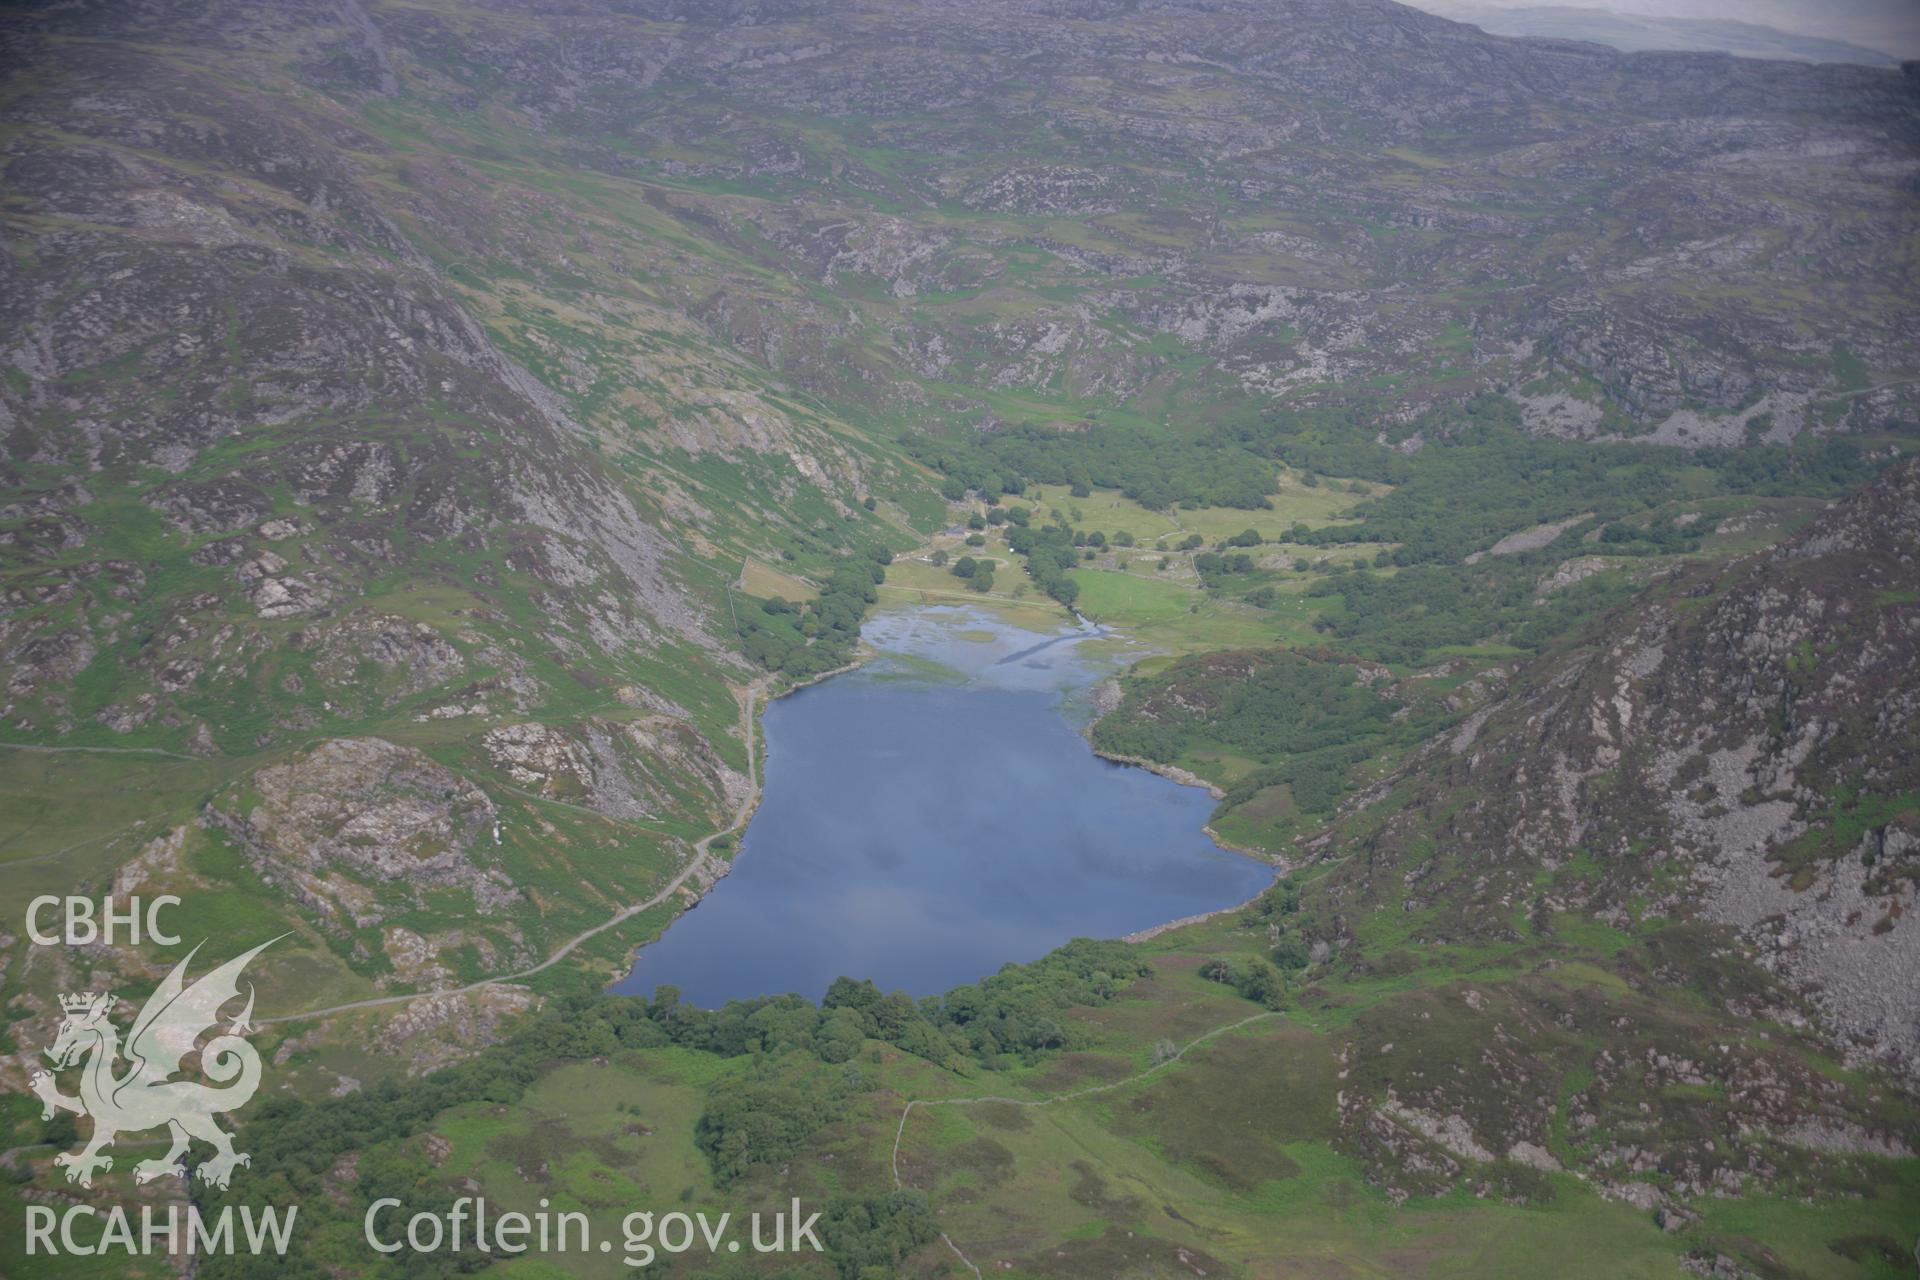 RCAHMW colour oblique aerial photograph of Llyn Cwm Bychan Taken on 25 July 2006 by Toby Driver.